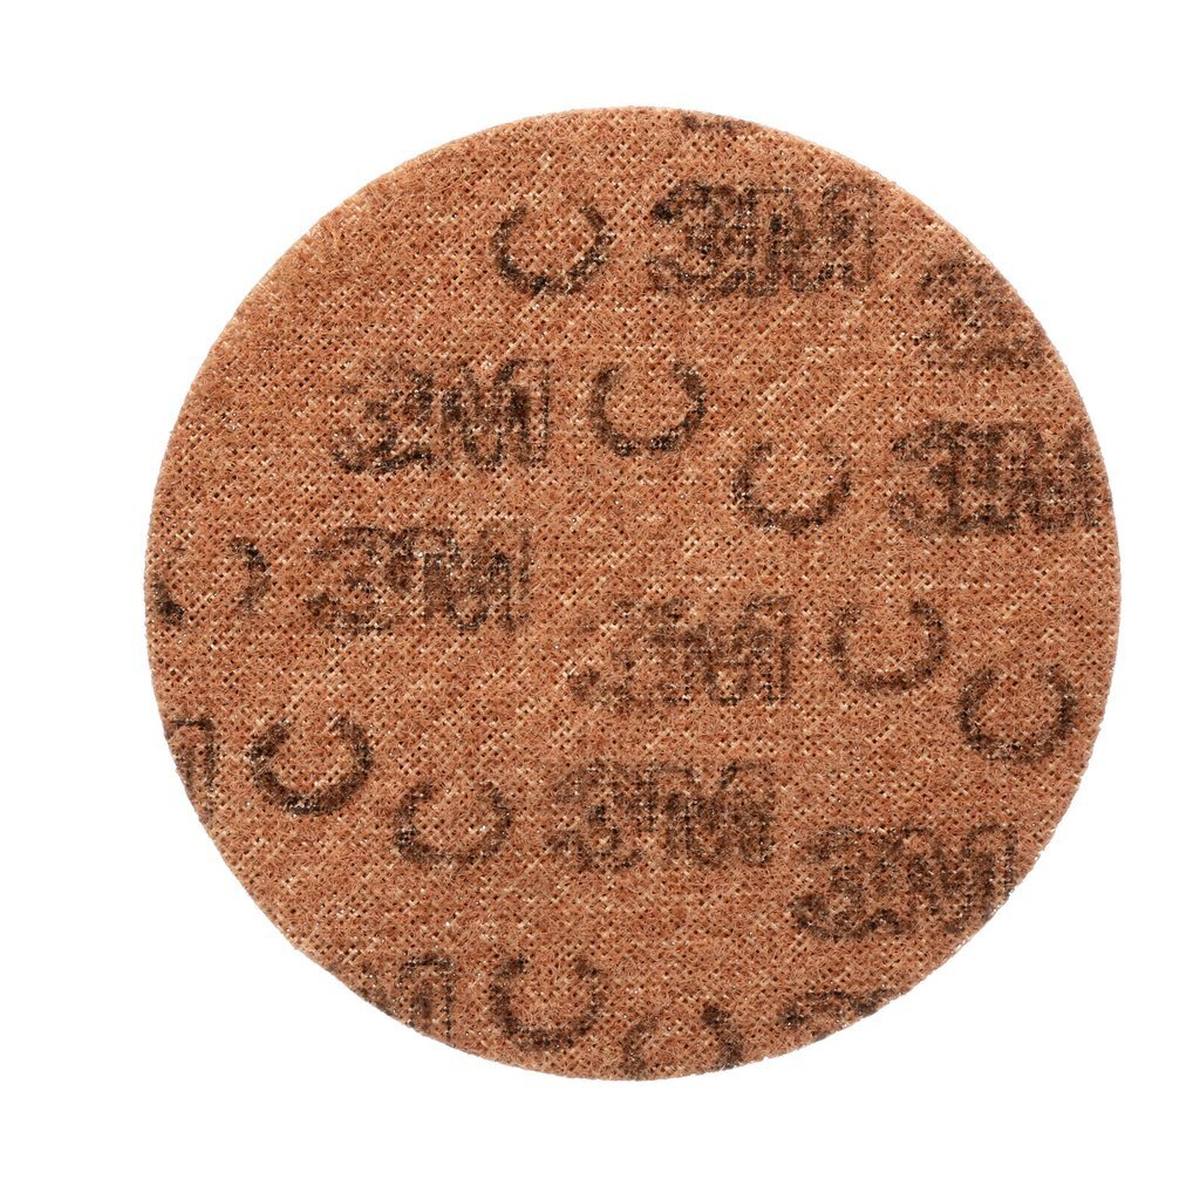 3M Scotch-Brite Non-woven disc SC-DH without centring, brown, 115 mm, A, coarse #65333